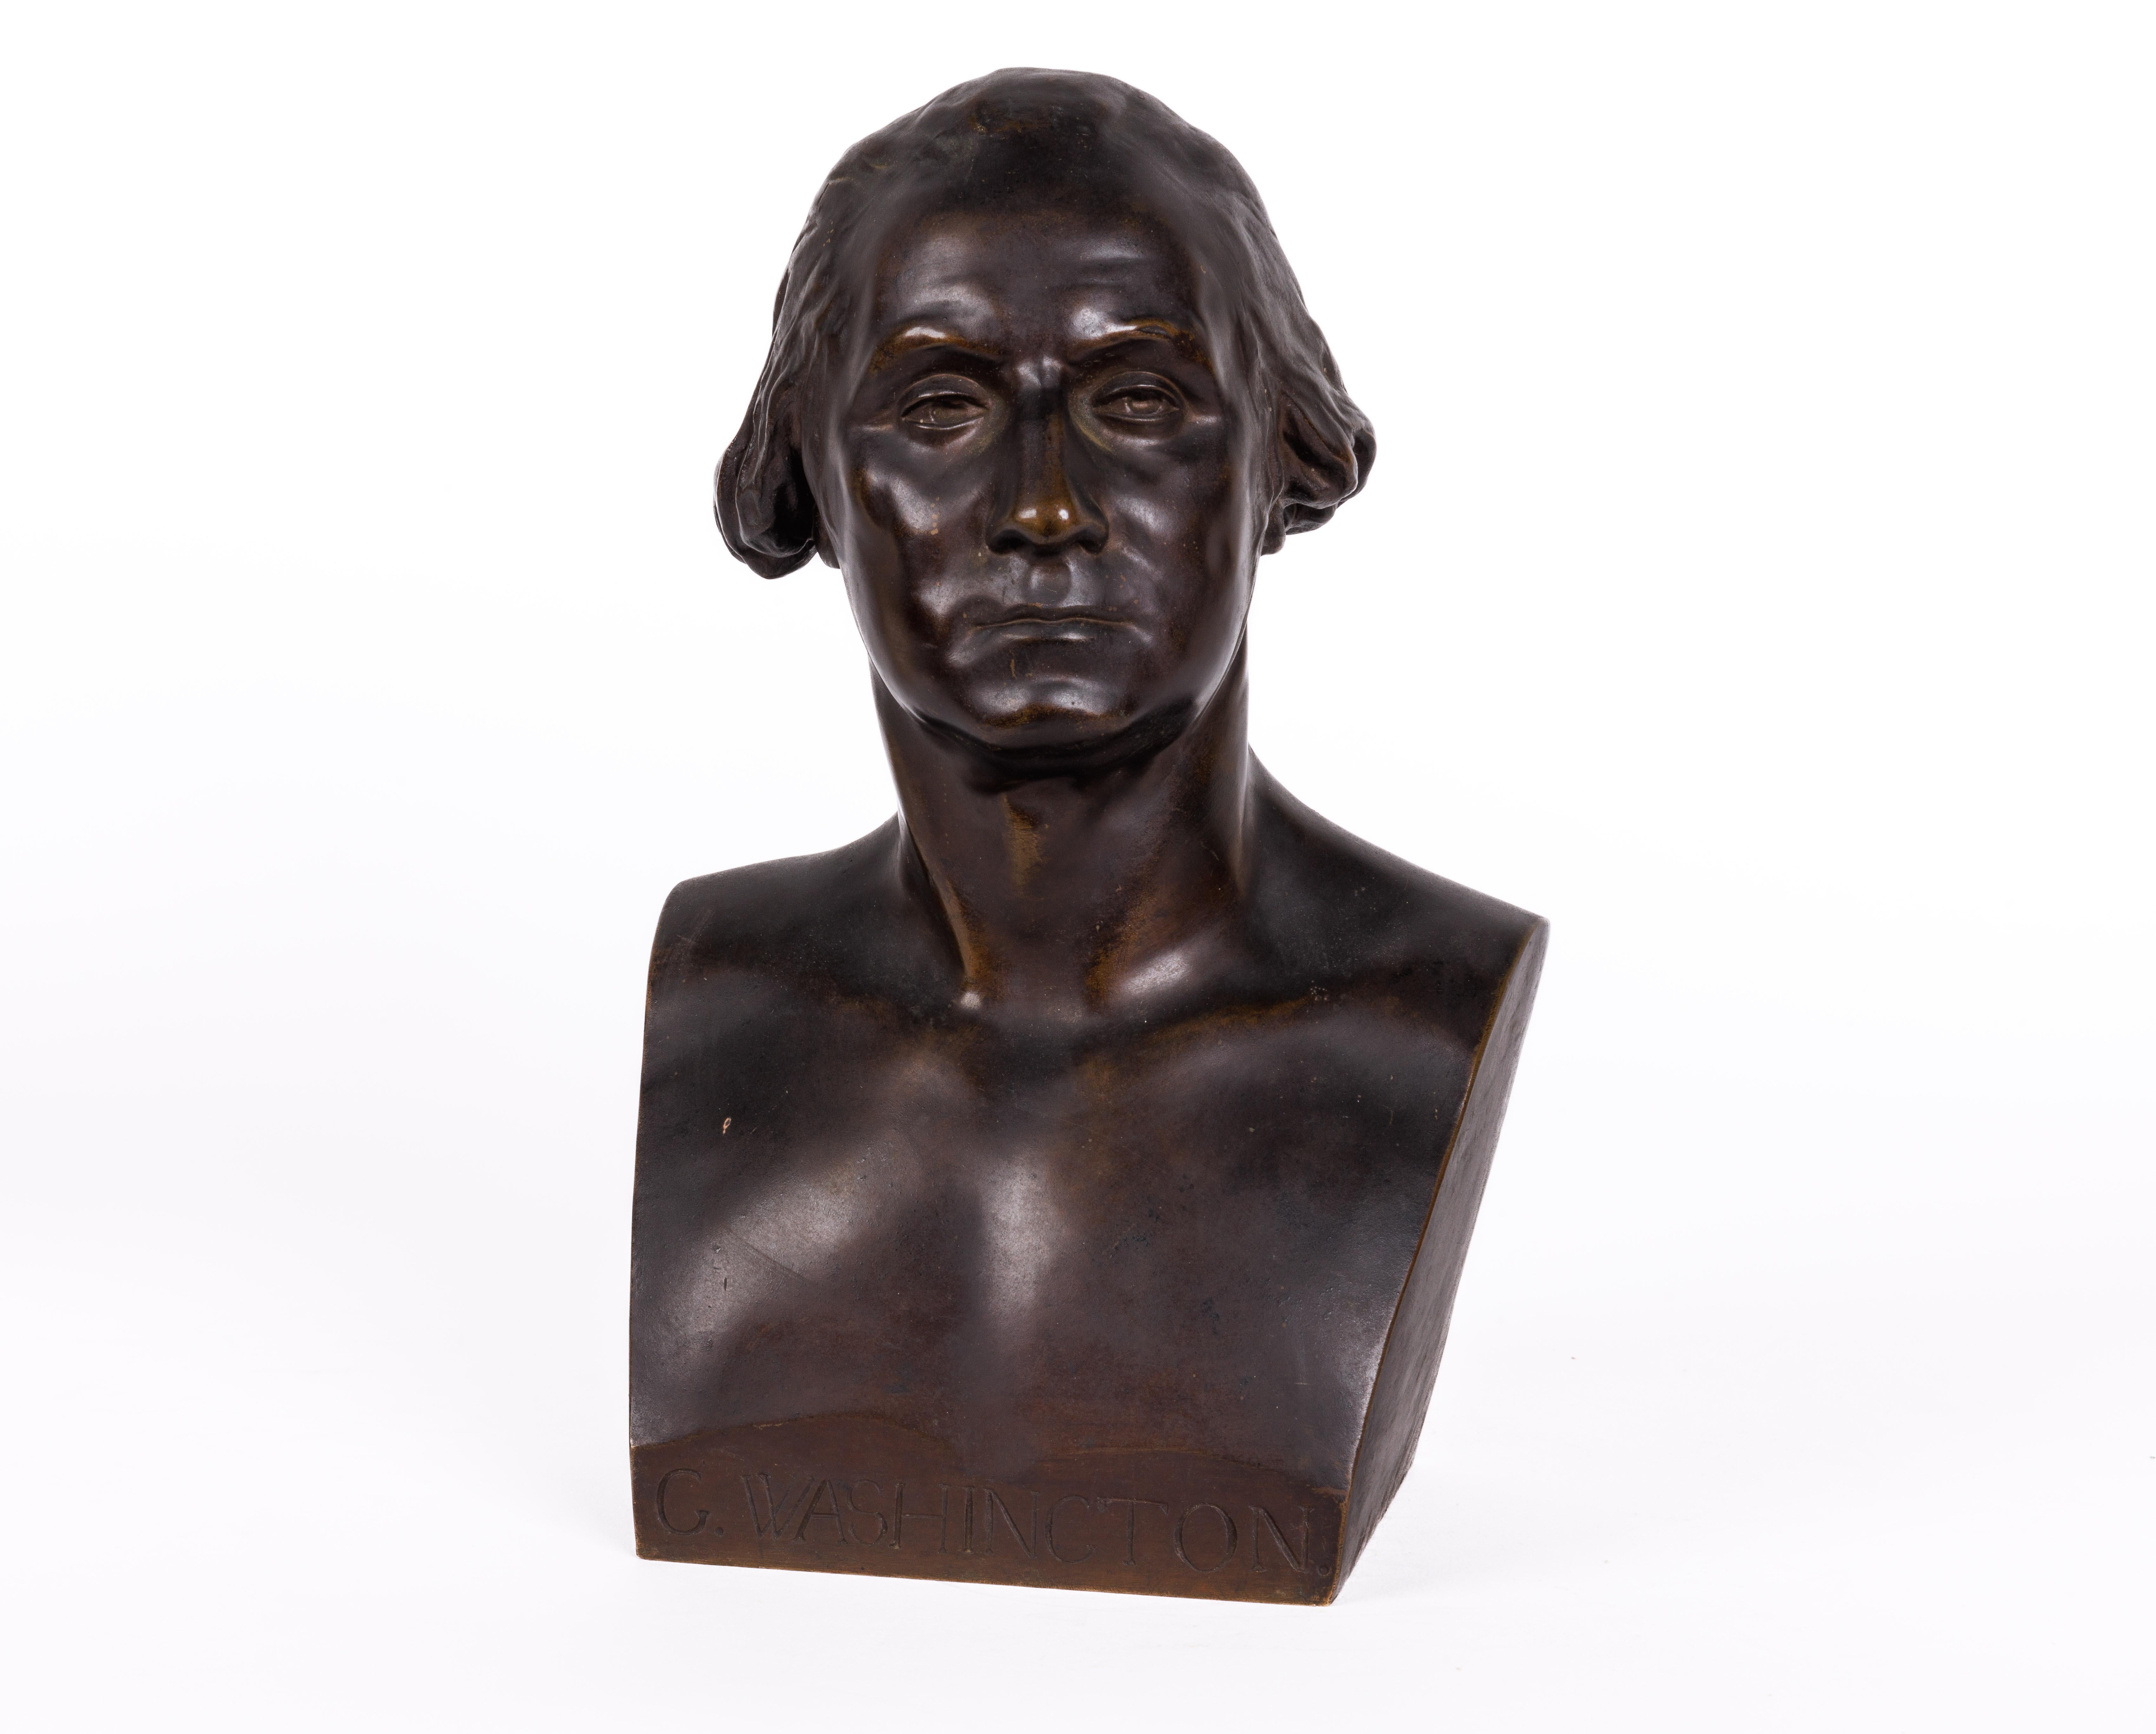 Ferdinand Barbedienne, A French patinated bronze bust of George Washington, circa 1880.

Signed. F. Barbedienne Fondeur
Stamped with the reduction Mecanique seal.

Measures: 10.5